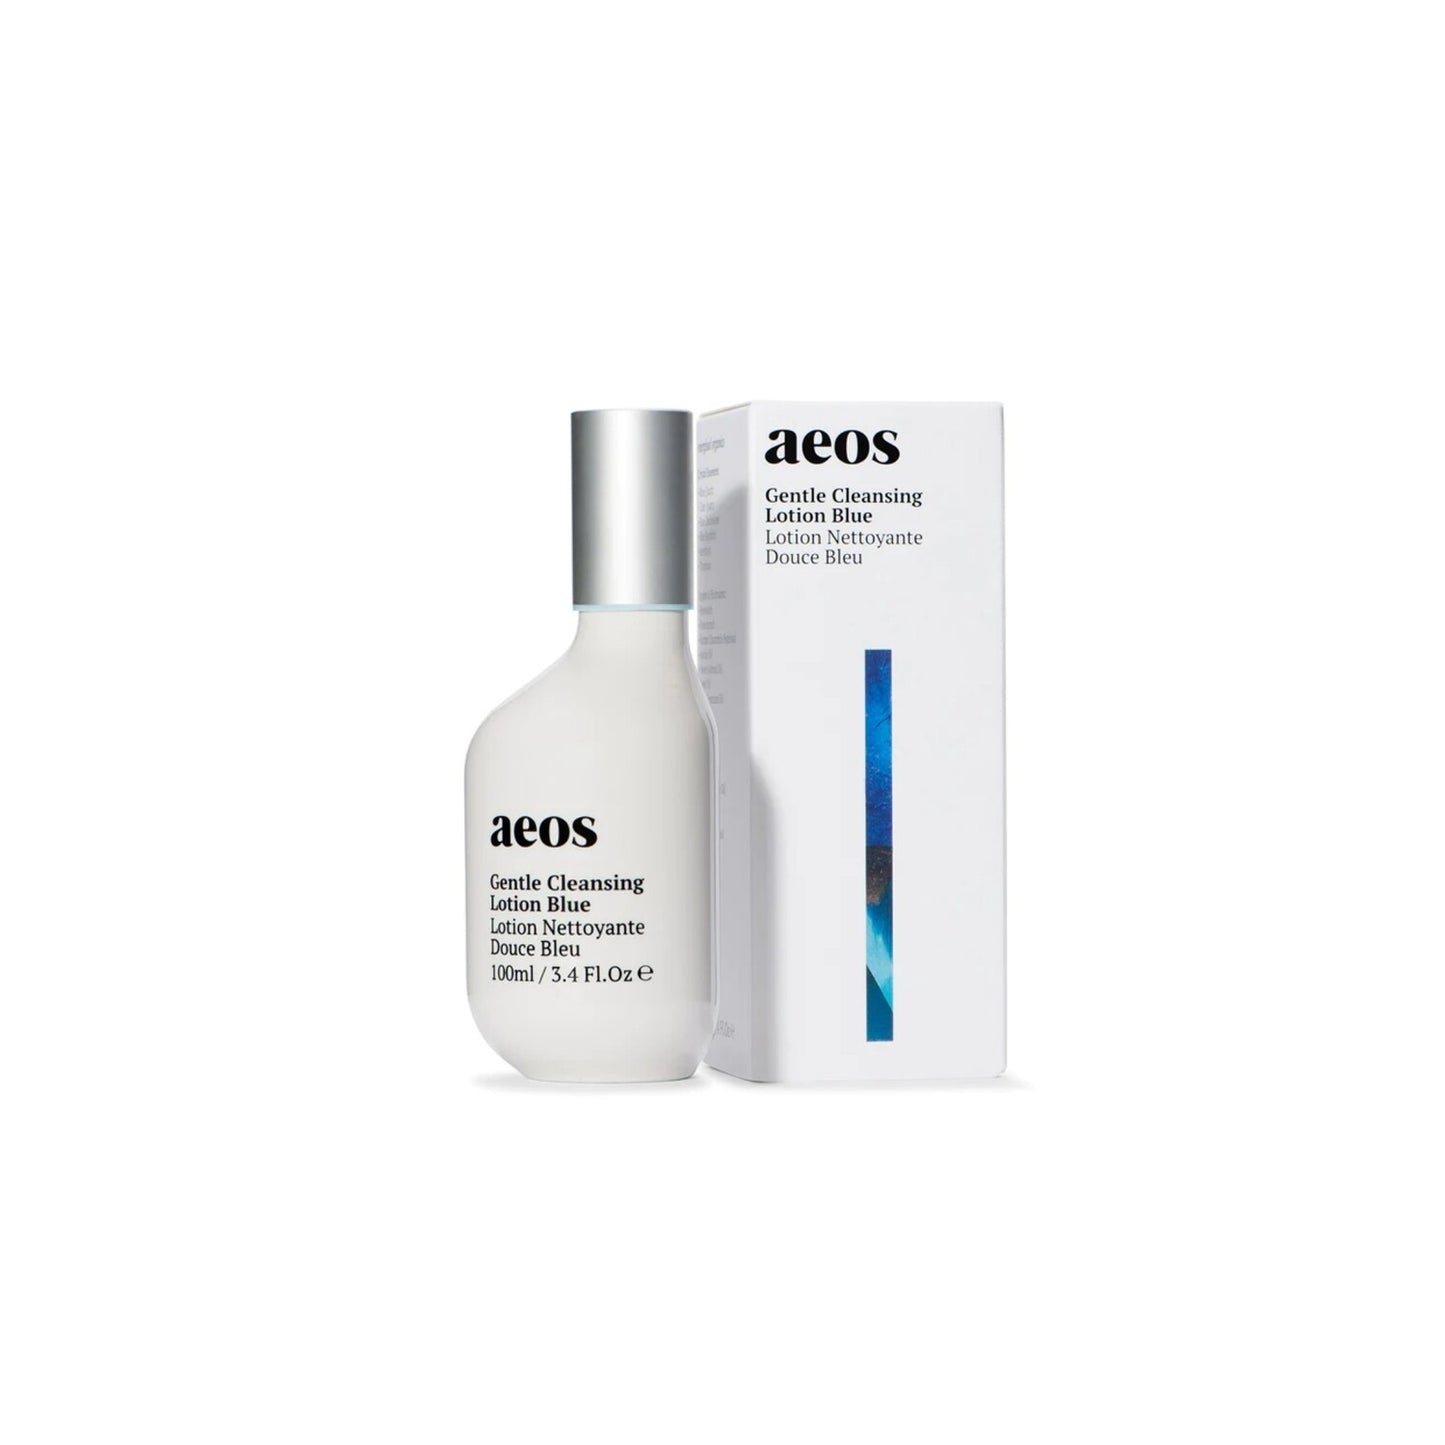 AEOS Gentle Cleansing Lotion